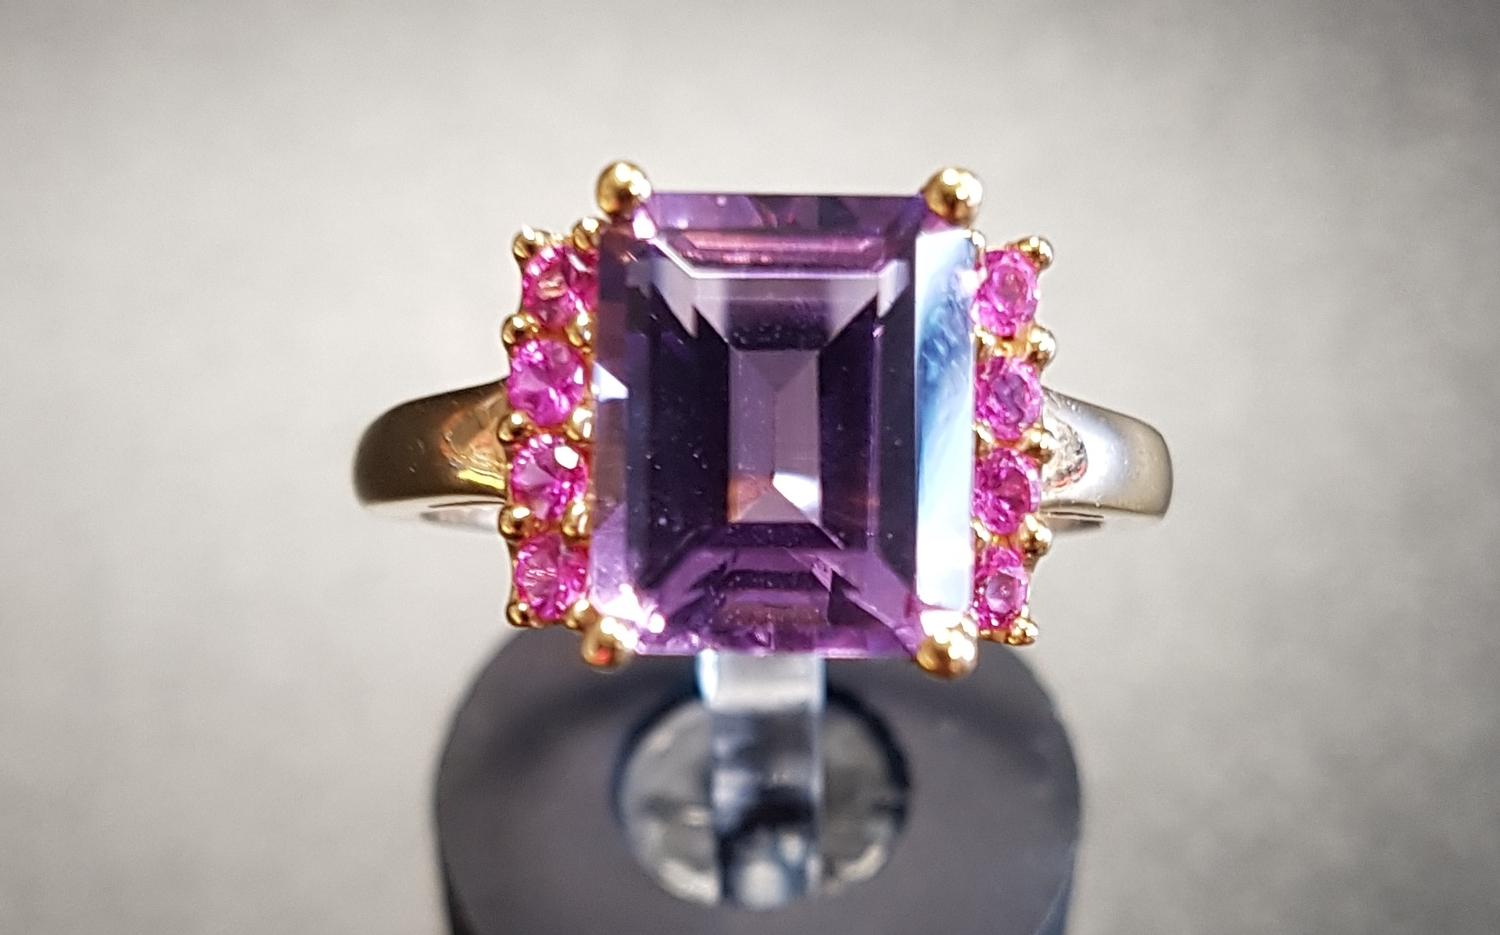 AMETHYST AND PINK GEM SET DRESS RING the central emerald cut amethyst flanked by a vertical row of - Image 2 of 2